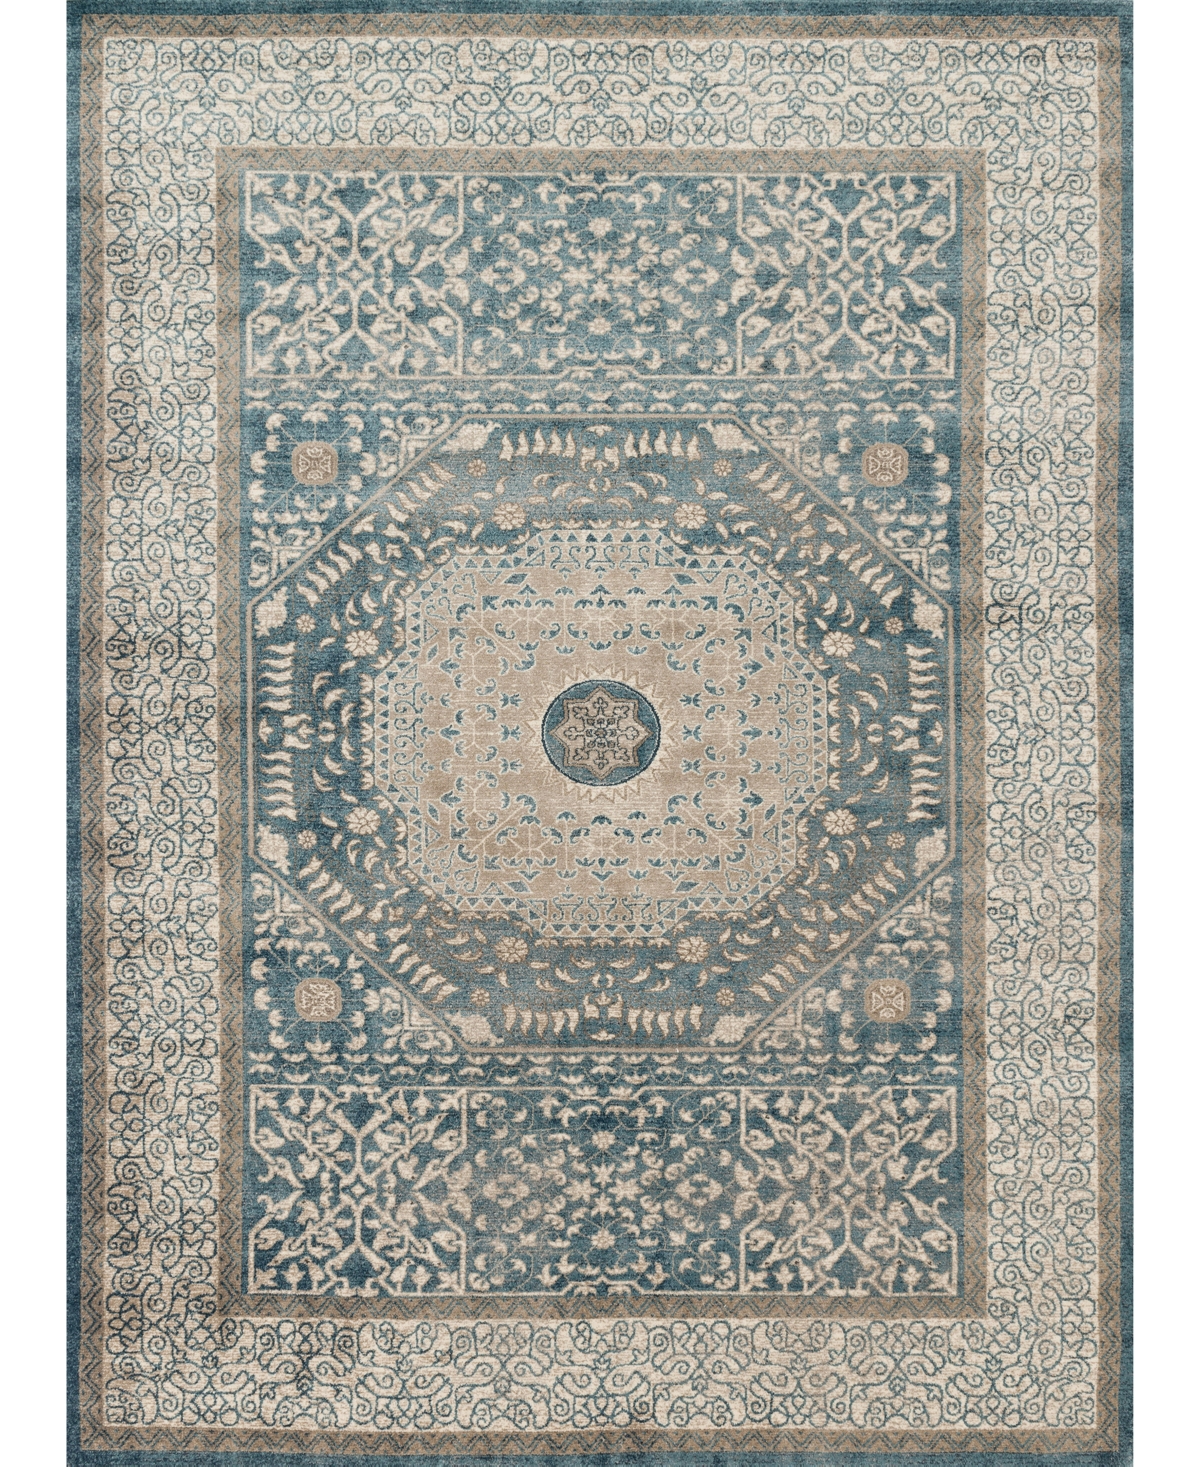 Loloi Century Tcq-01 6'7in x 9'2in Area Rug - Blue, Sand